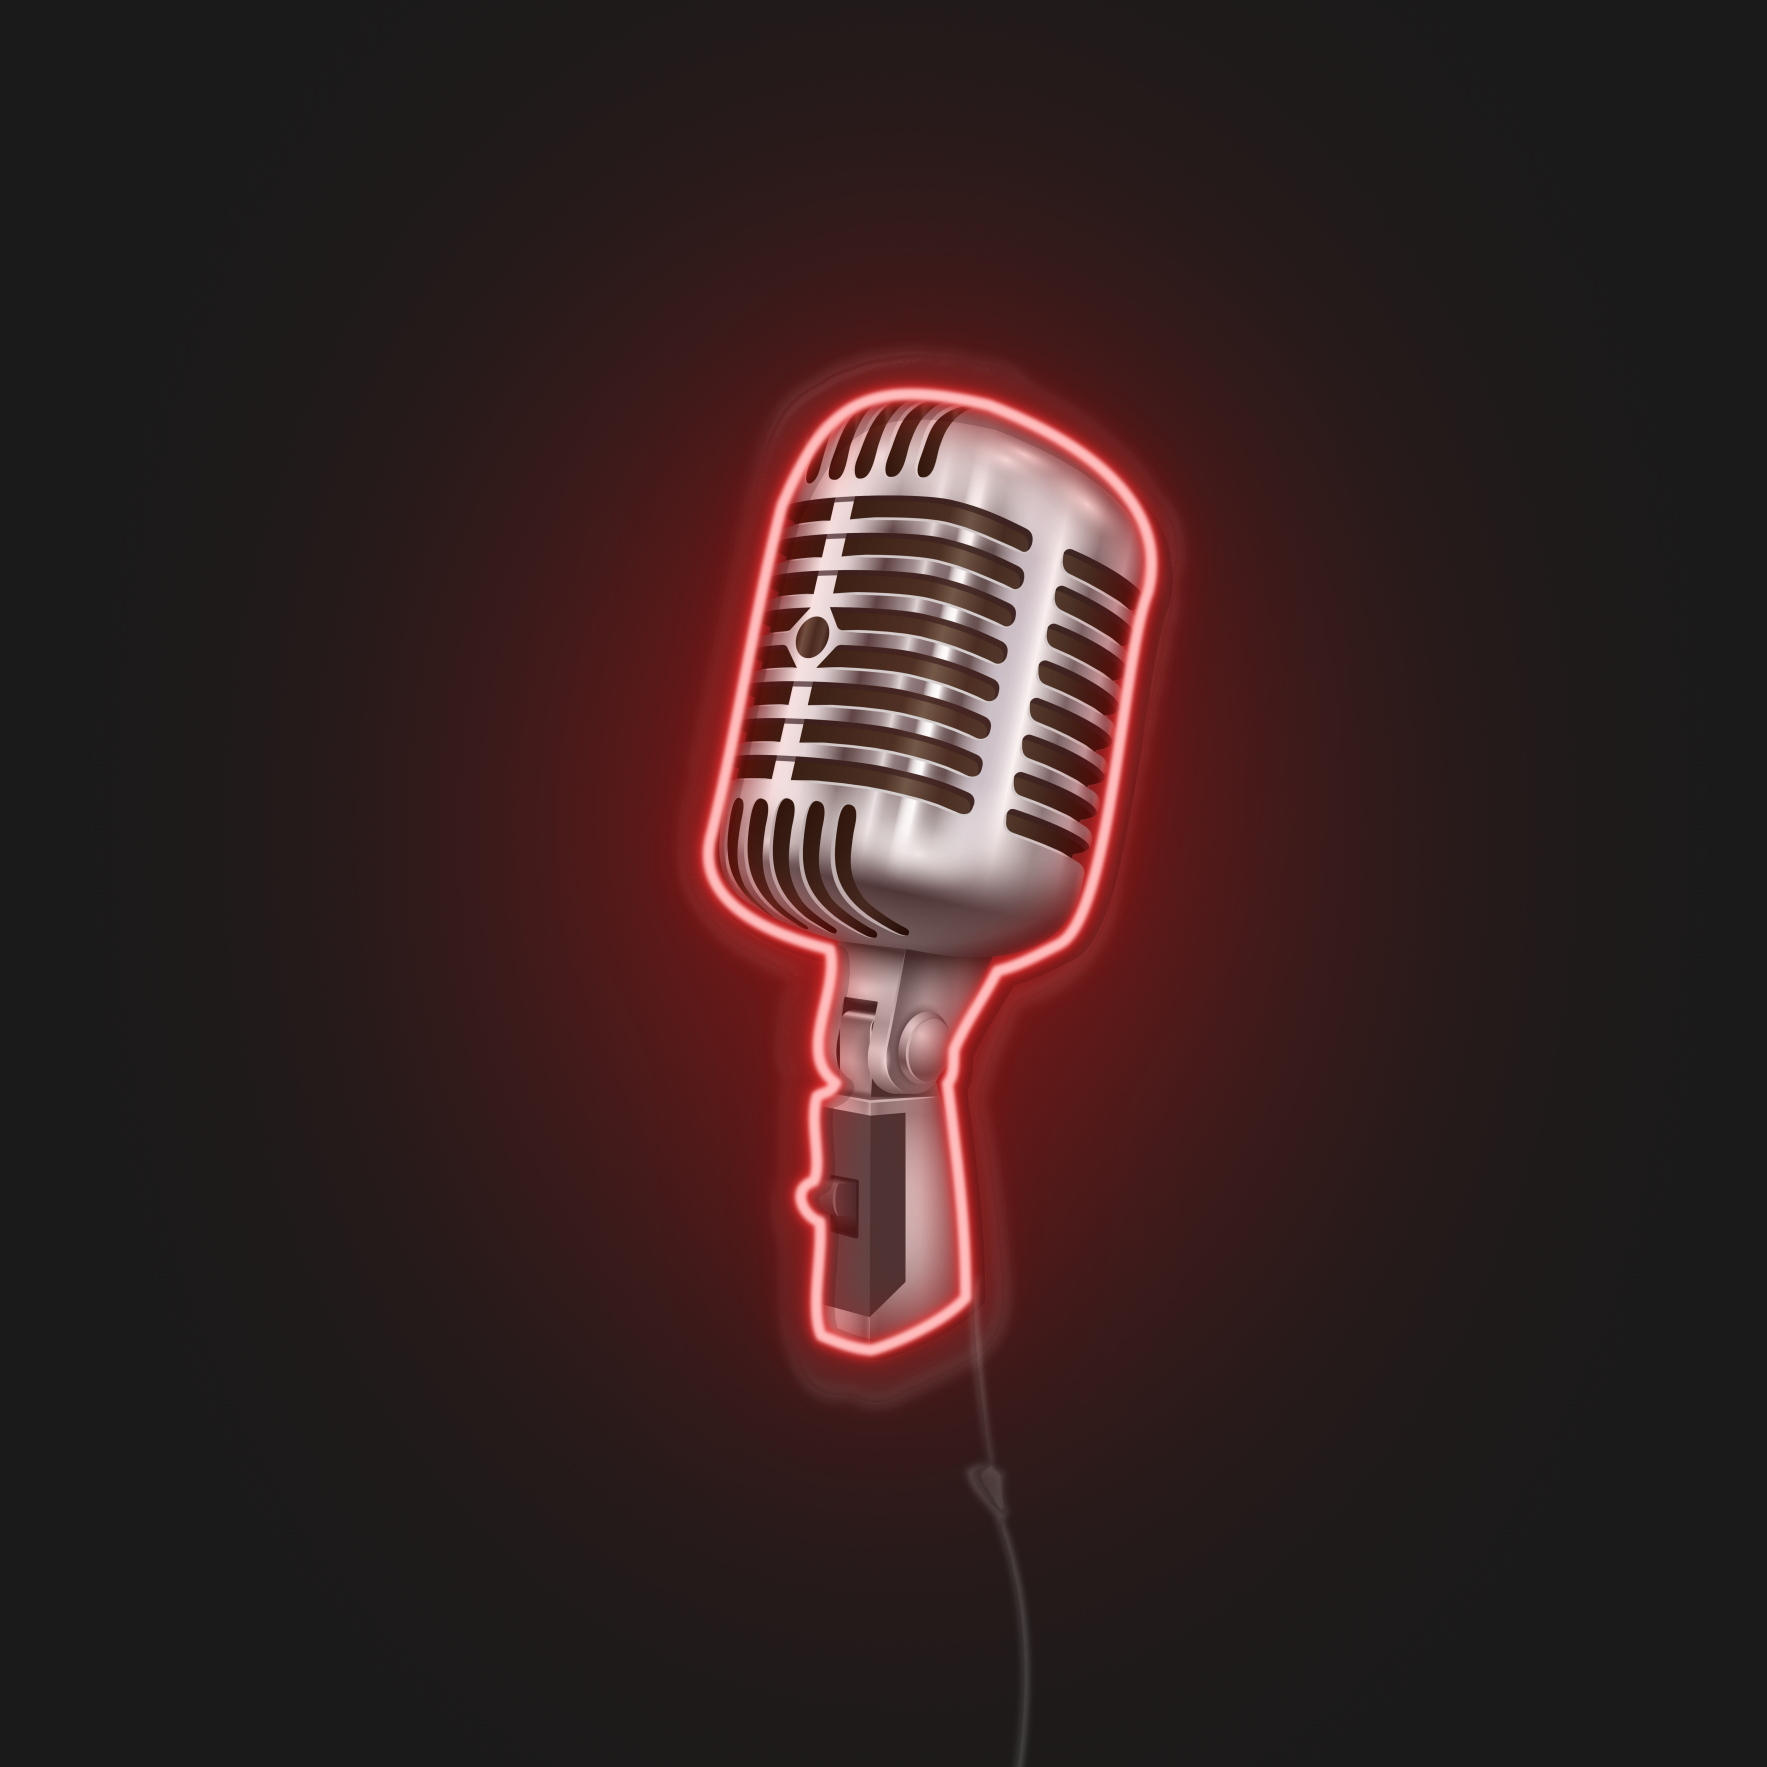 Microphone by macrovector neonerdy.design